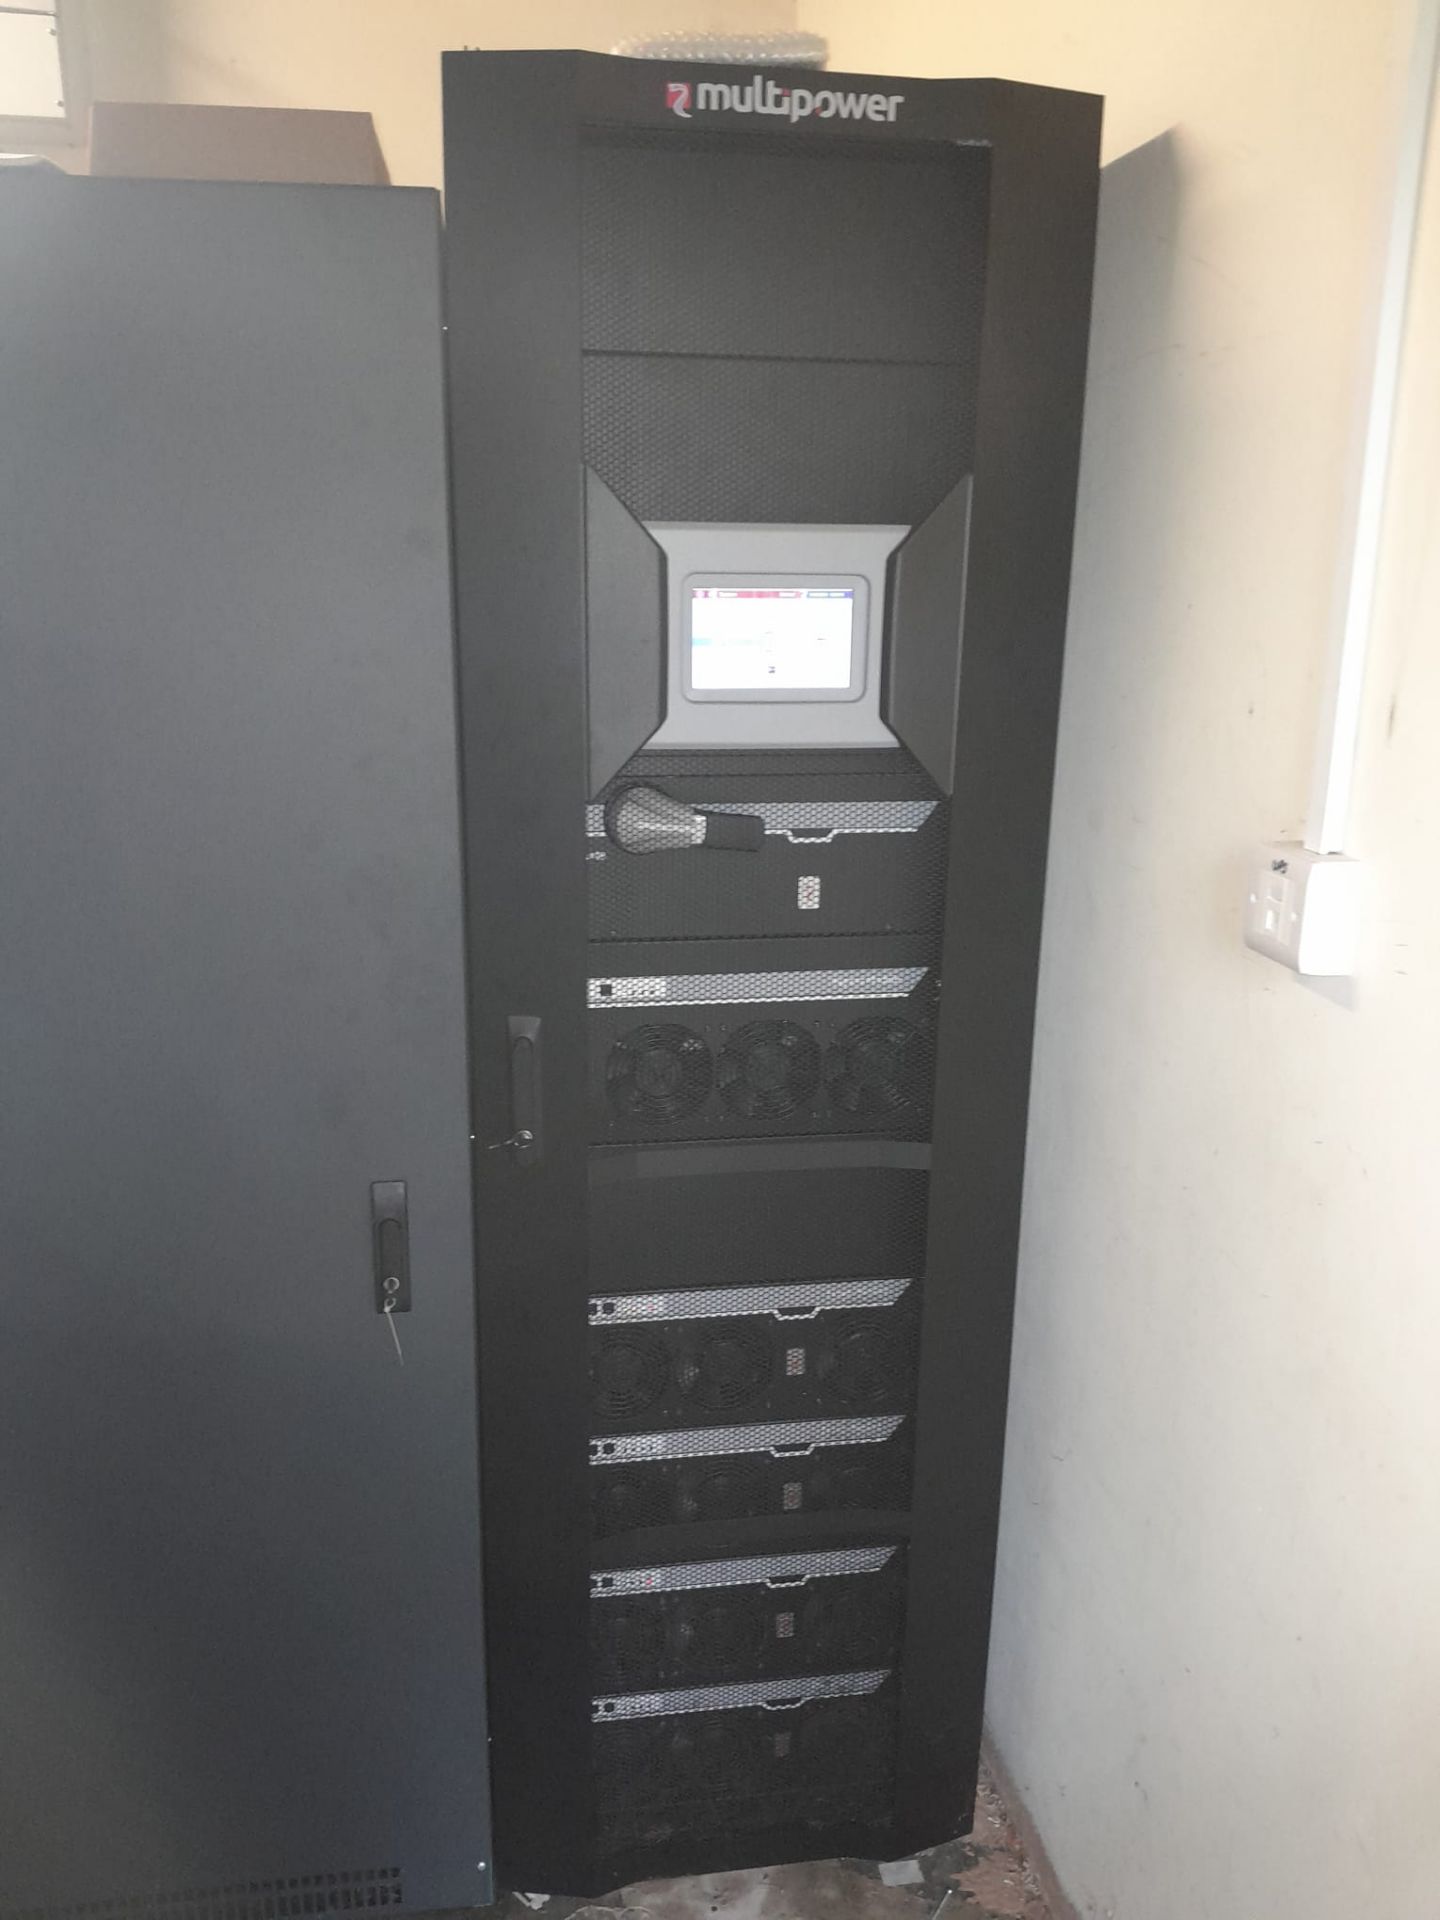 Riello MPW300 Uninterruptible Power Supply UPS, serial no. ME09UP110530007, with connectivity panel, - Image 3 of 11